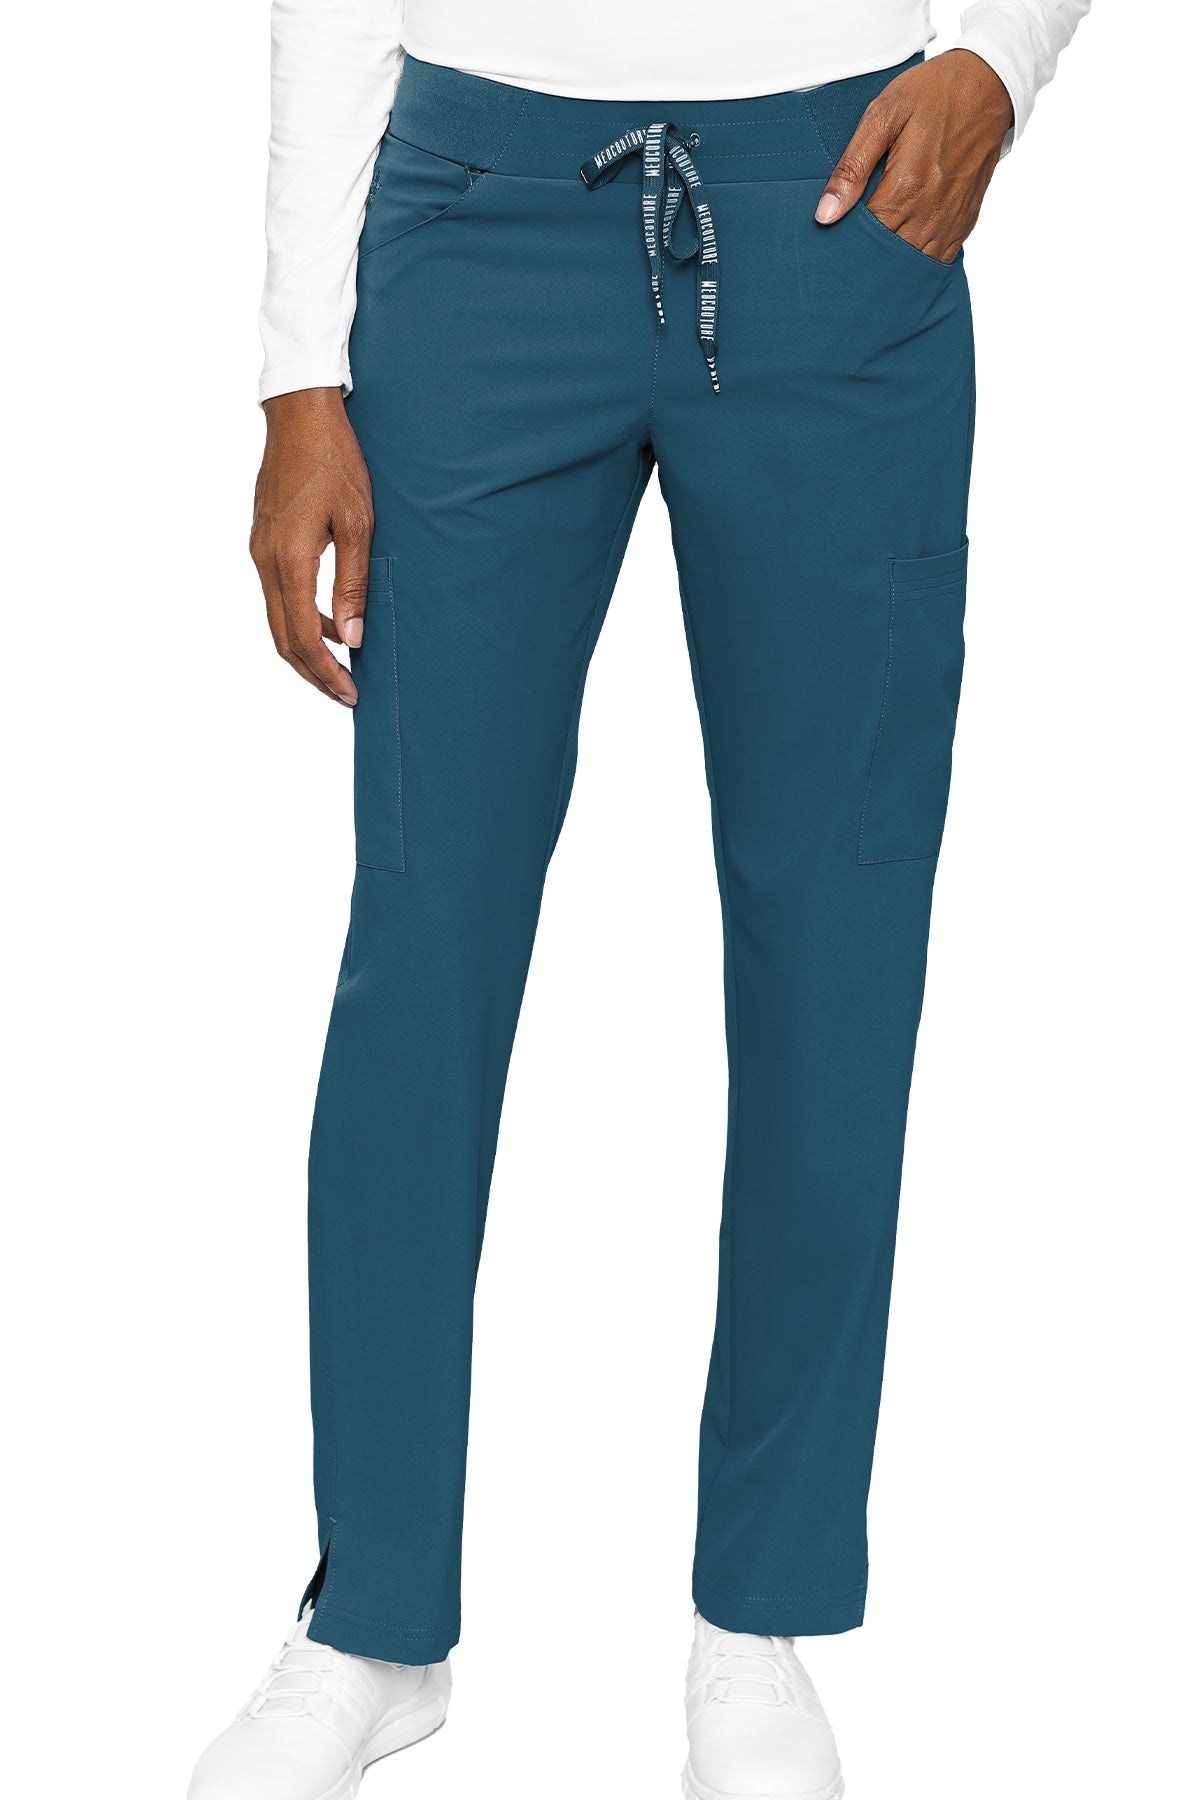 Med Couture 8733 Yoga Waist Pant